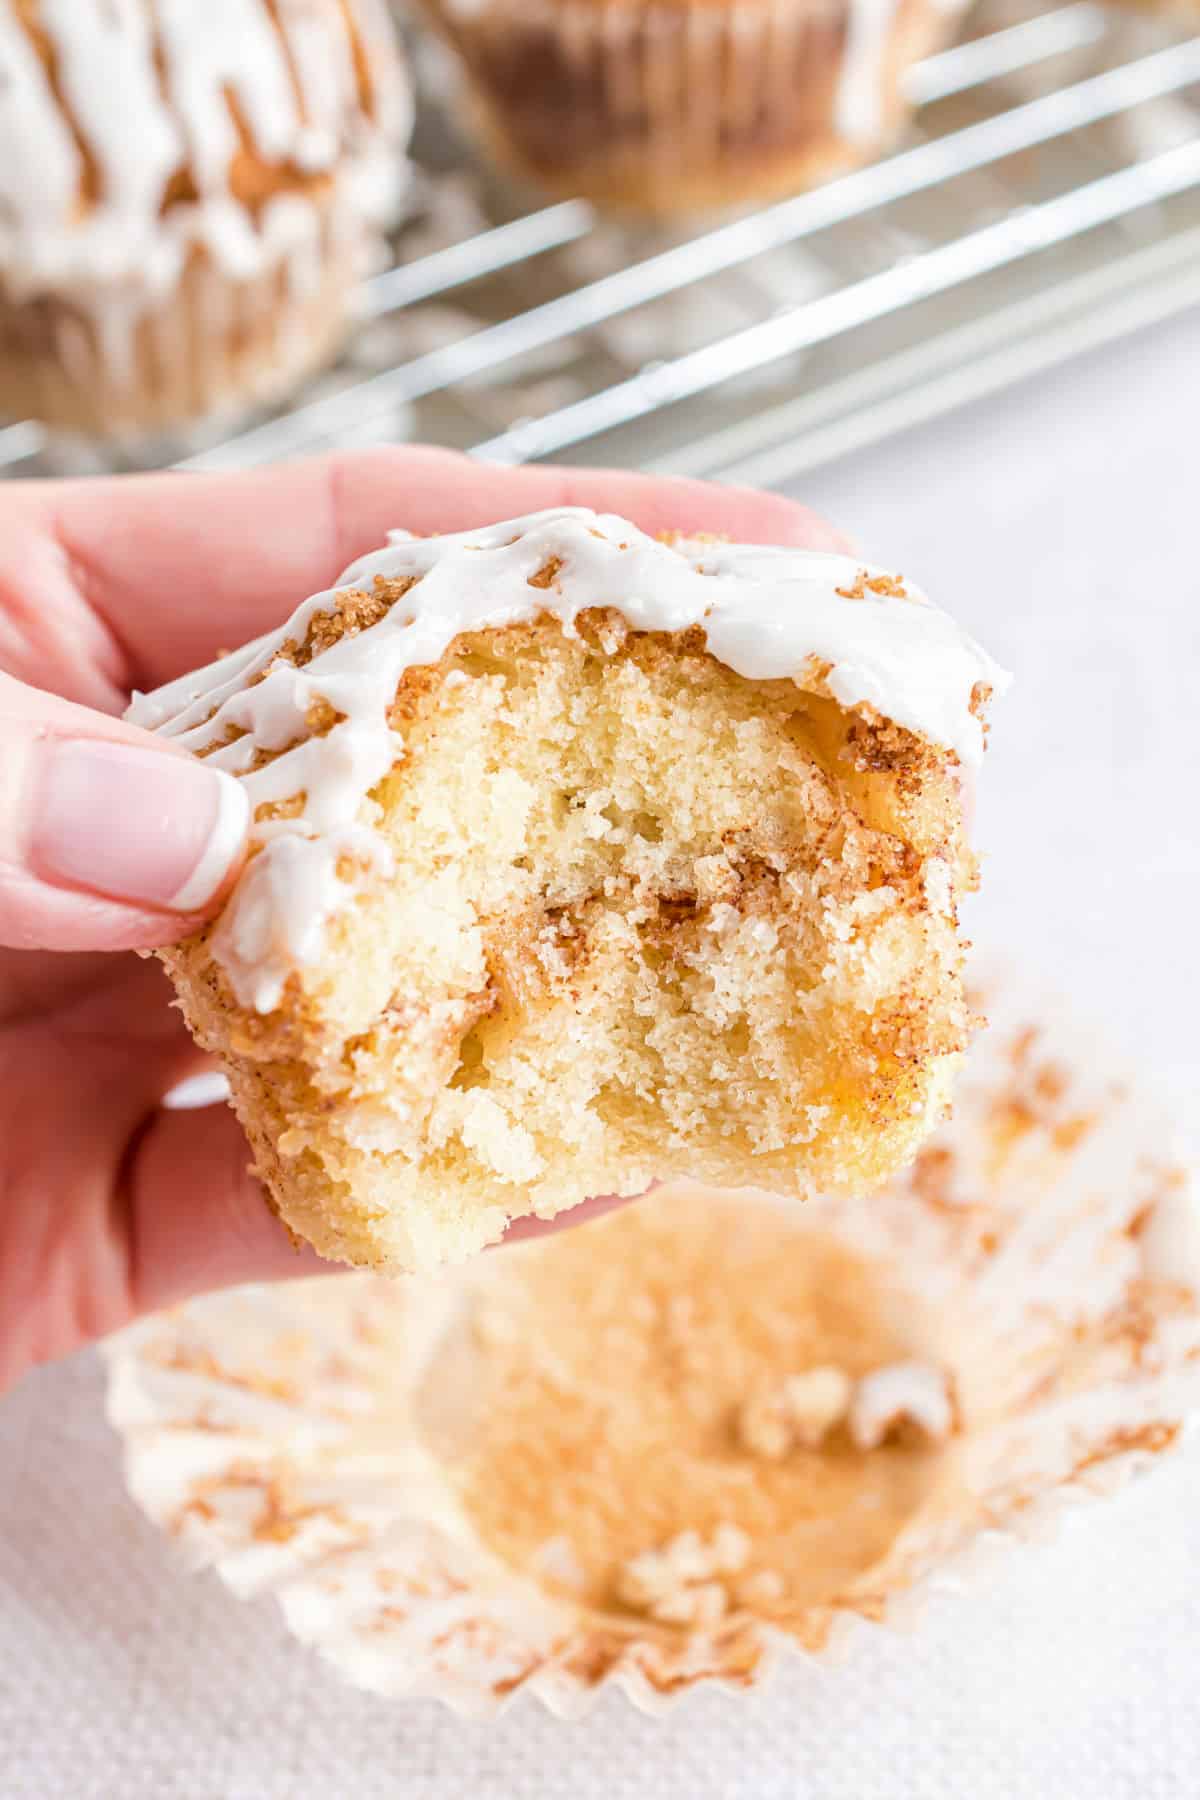 Apple muffins with a ribbon of cinnamon and vanilla icing and a bite taken.